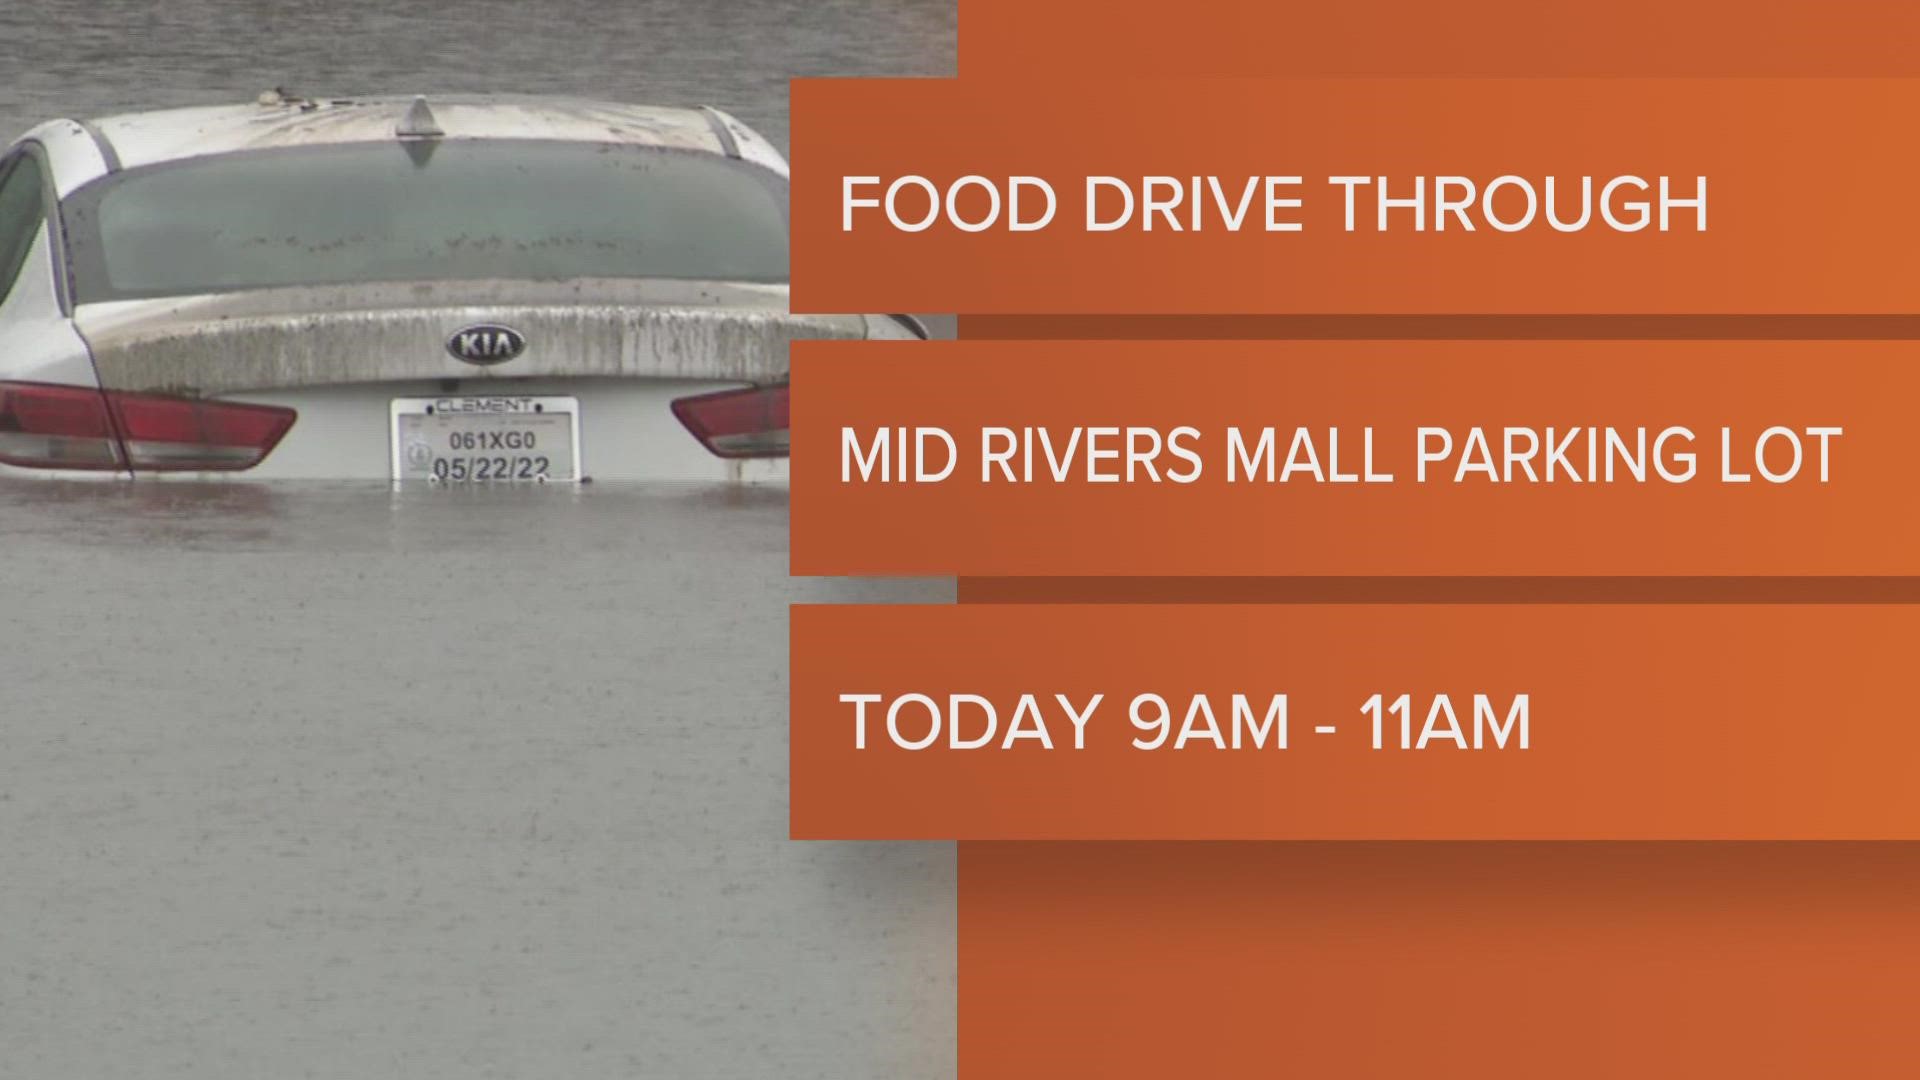 A food distribution event that was canceled Tuesday due to flooding will take place Wednesday. That flash flooding may mean there are now even more people in need.